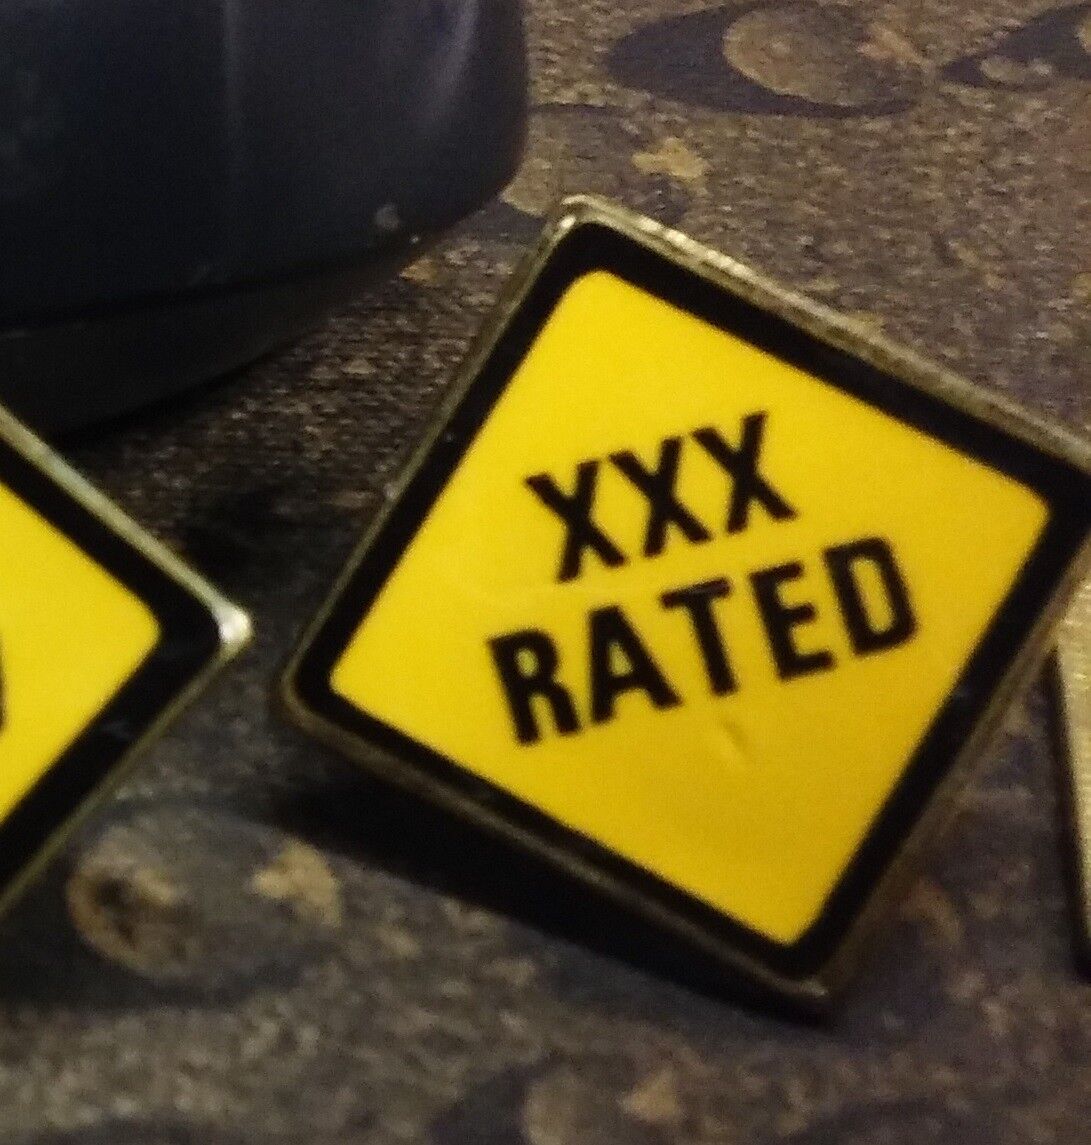 XXX Rated Warning Road Sign Adult Humor pin badge